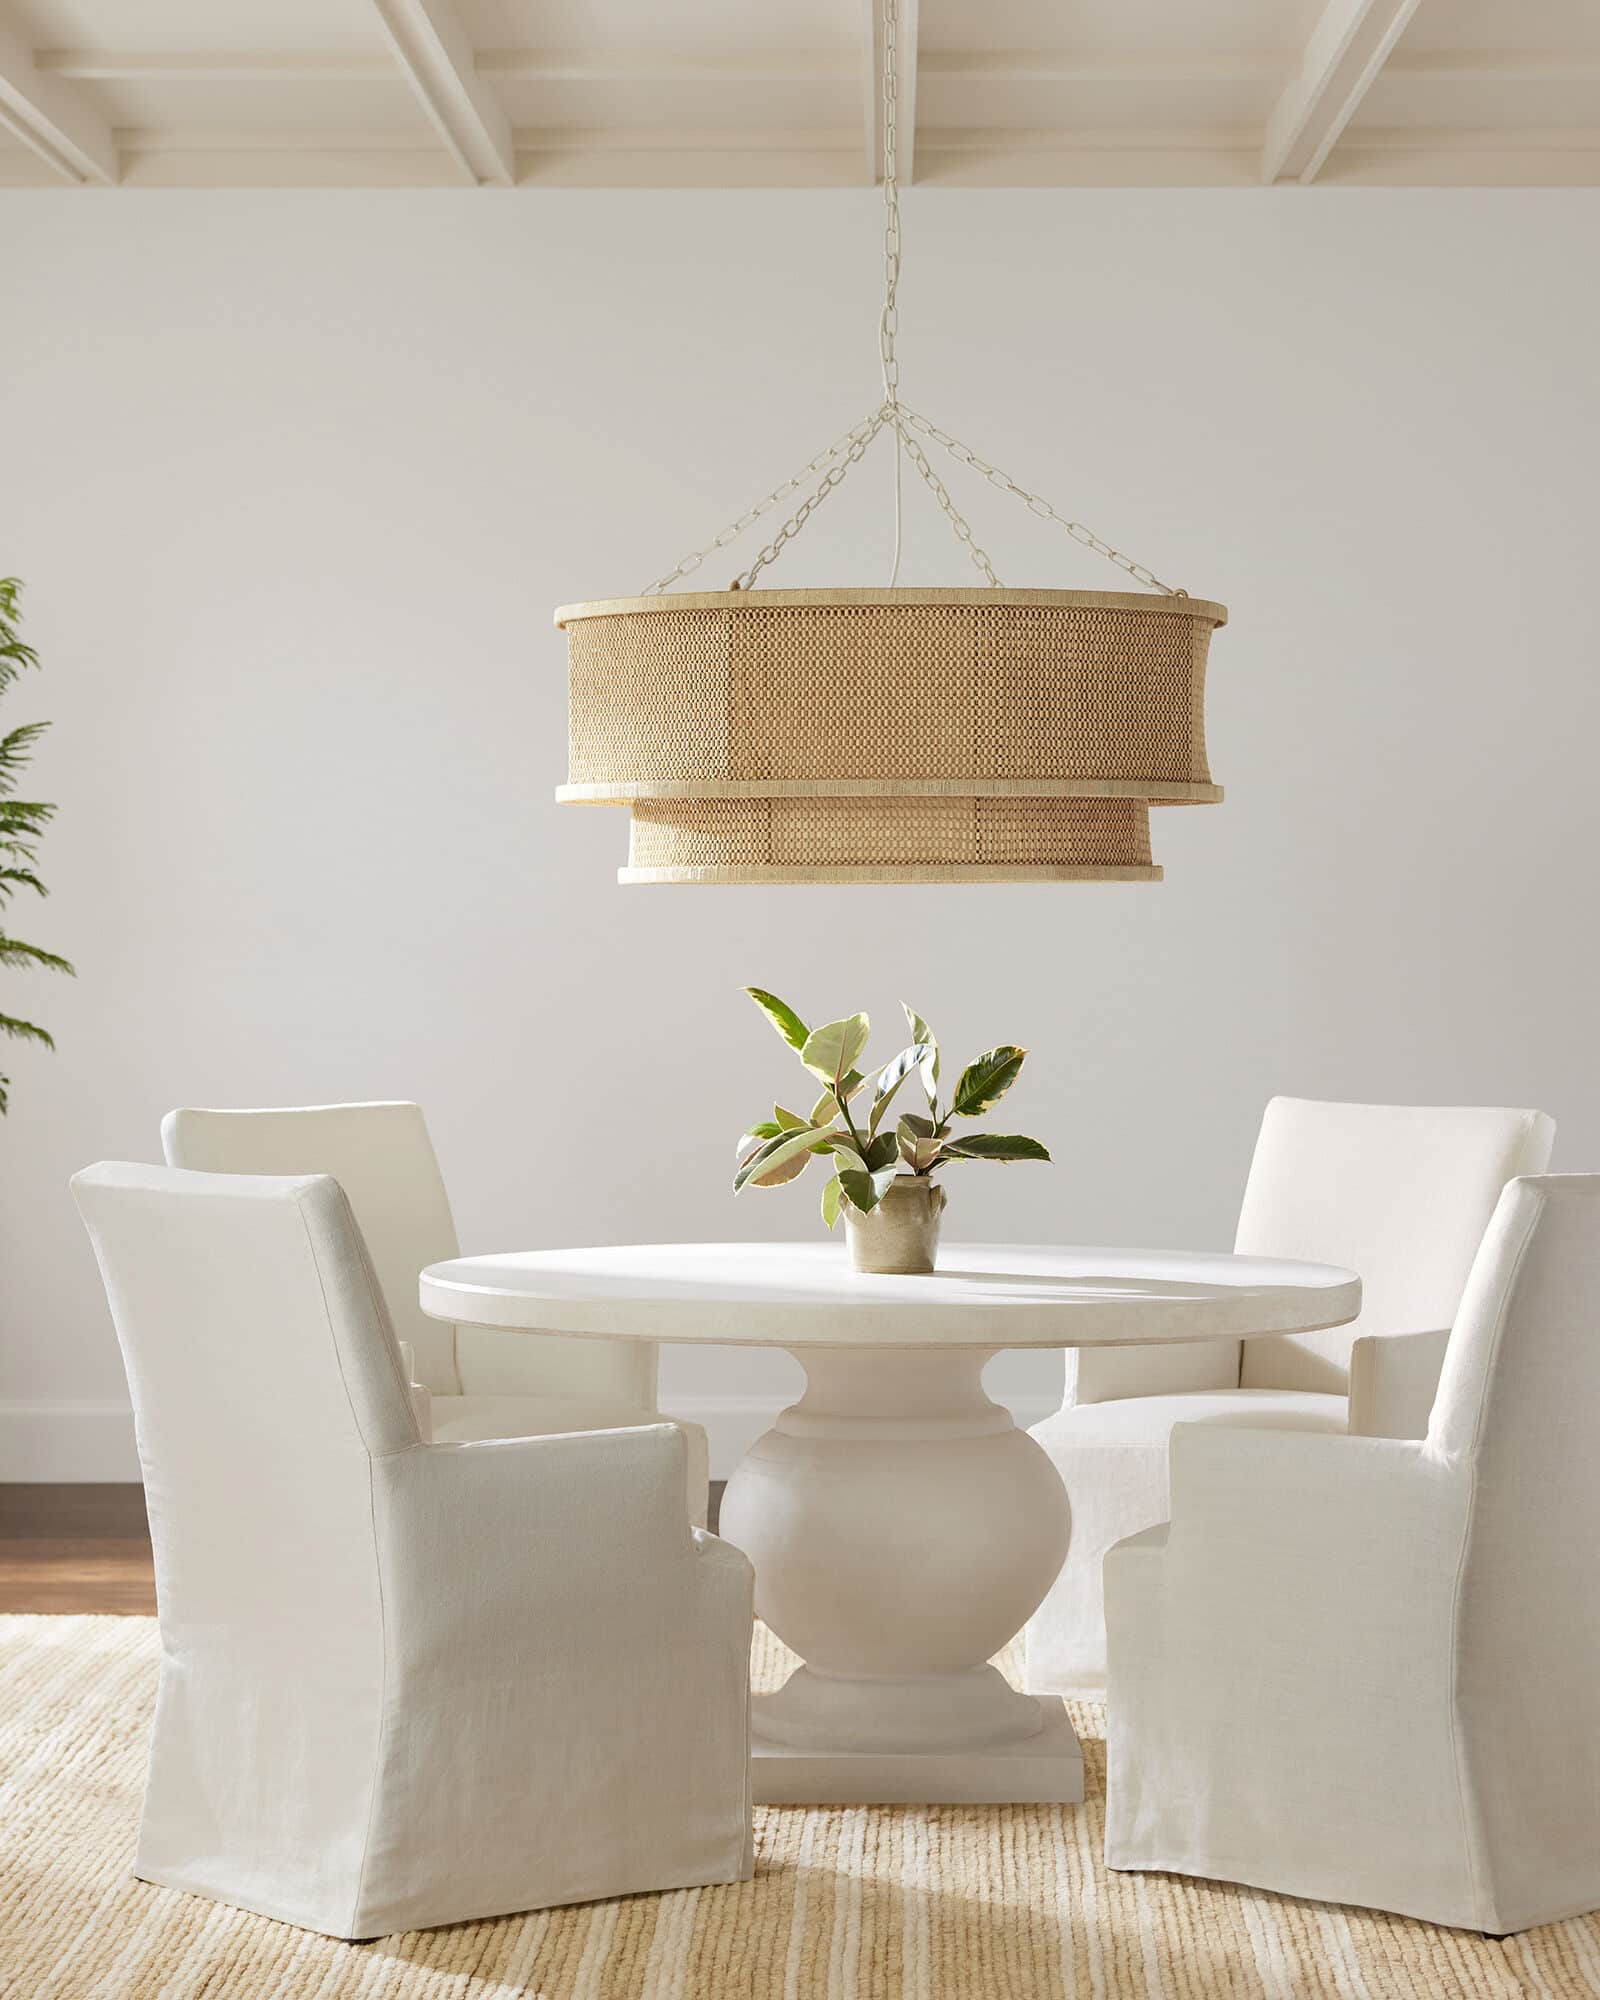 Serena & Lily spring collection dining room - round table